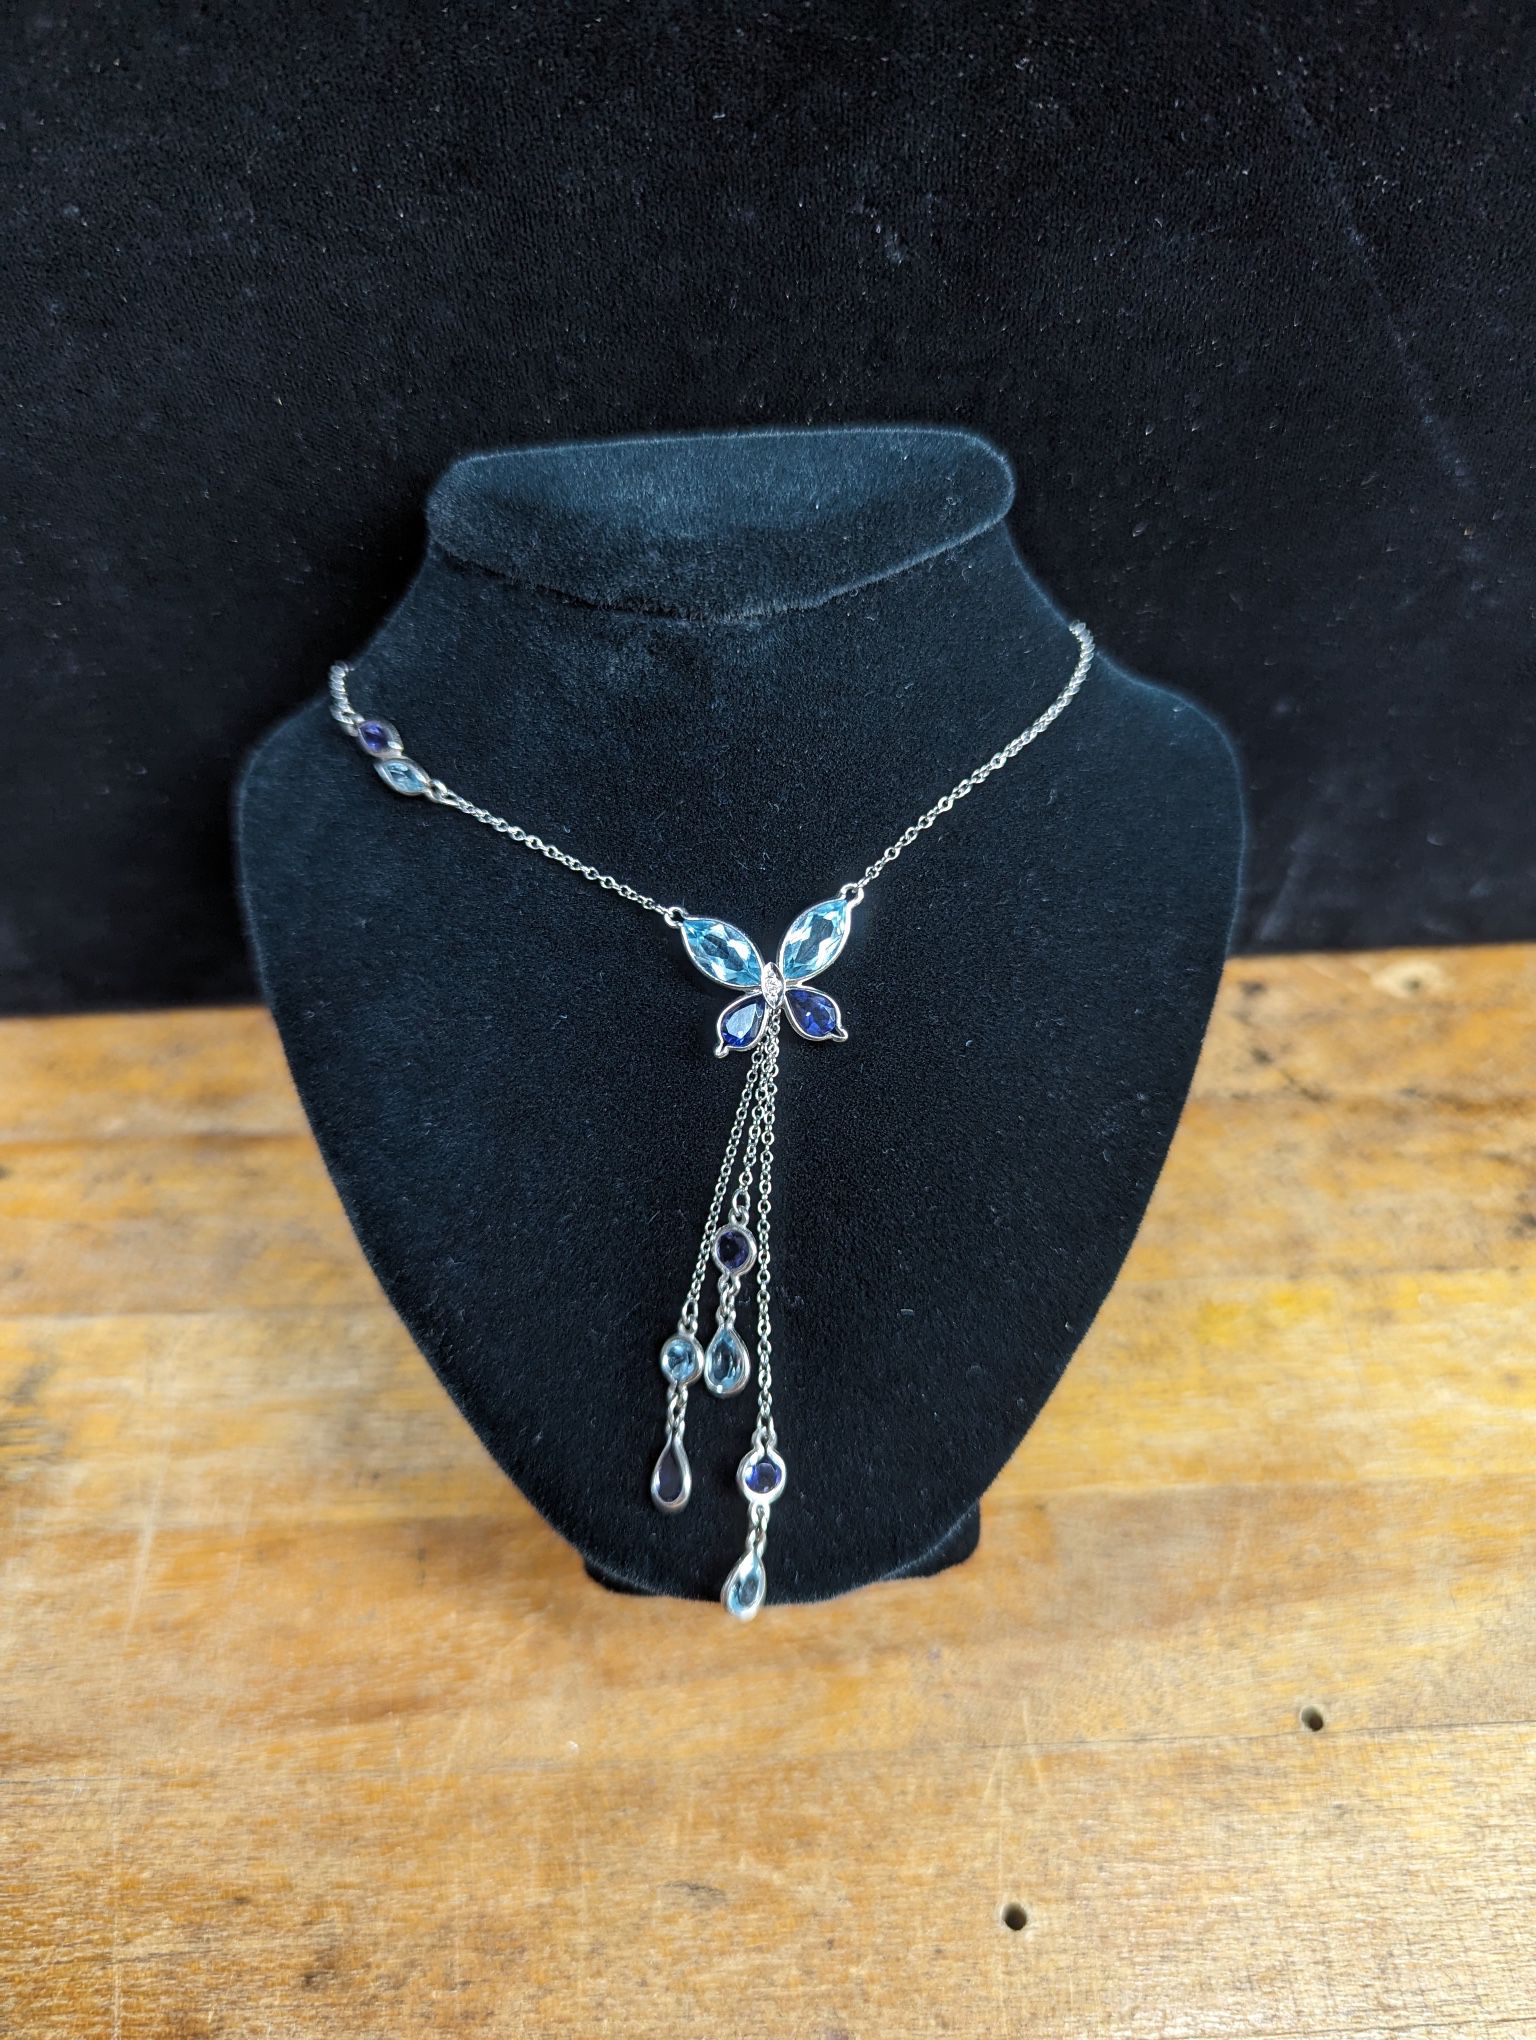 14KT White Gold Amethyst and Blue Topaz Butterfly Necklace Rolo Chain 18 Inches